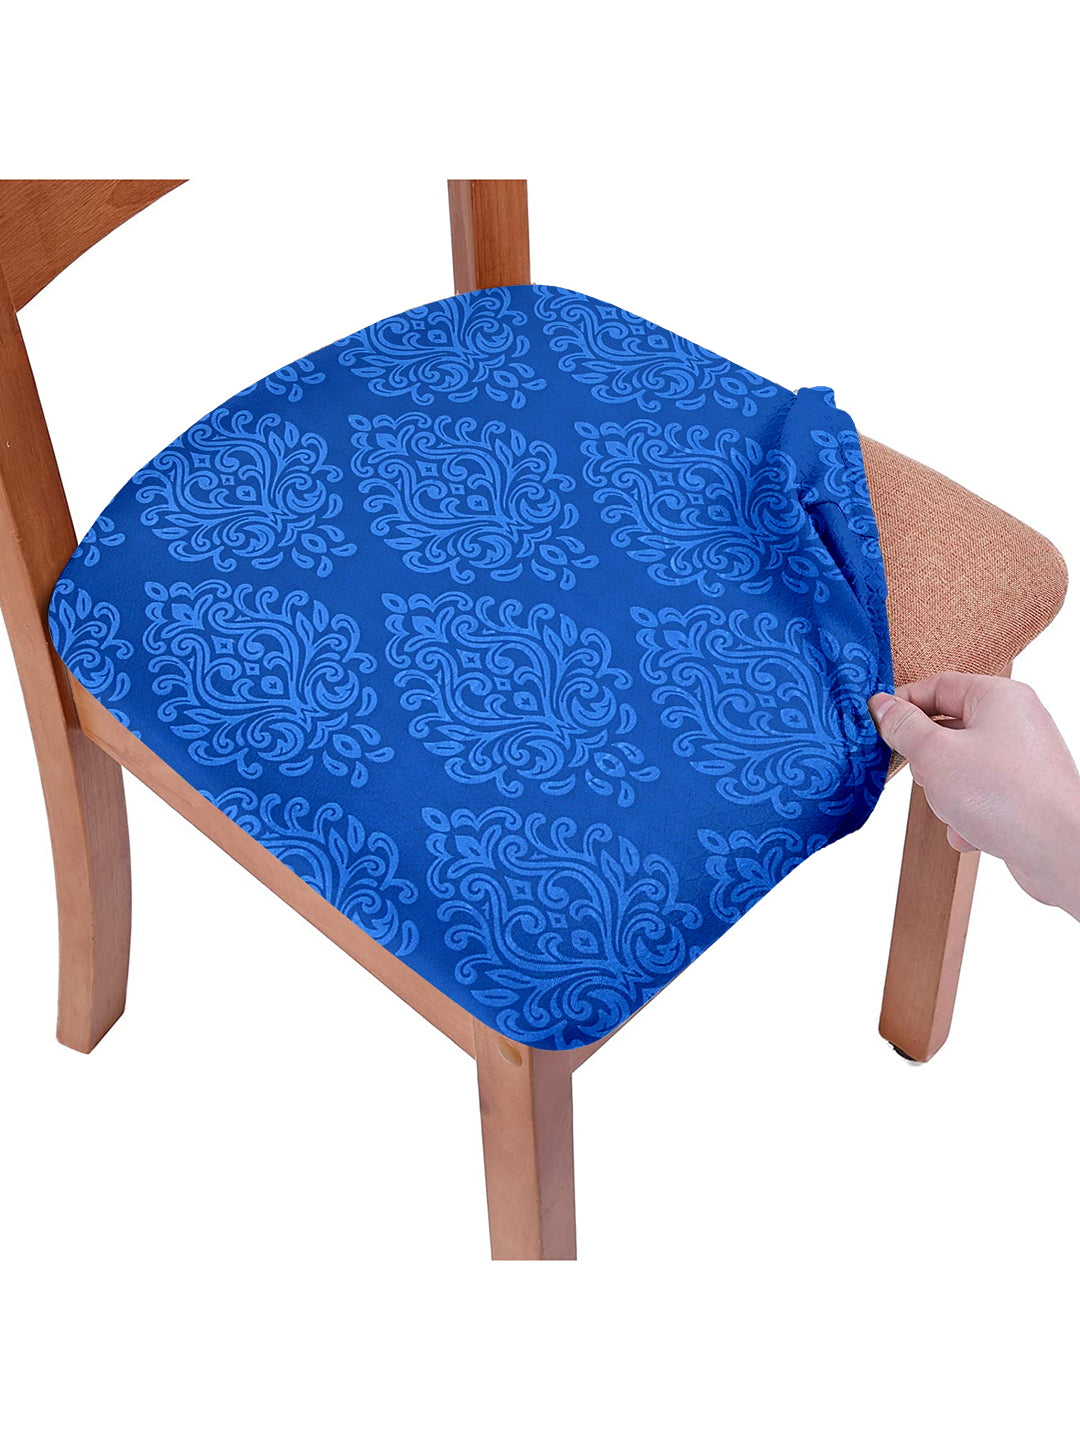 Stretchable Ethnic Printed Non Slip Chair Pad Cover Pack of 6- Blue